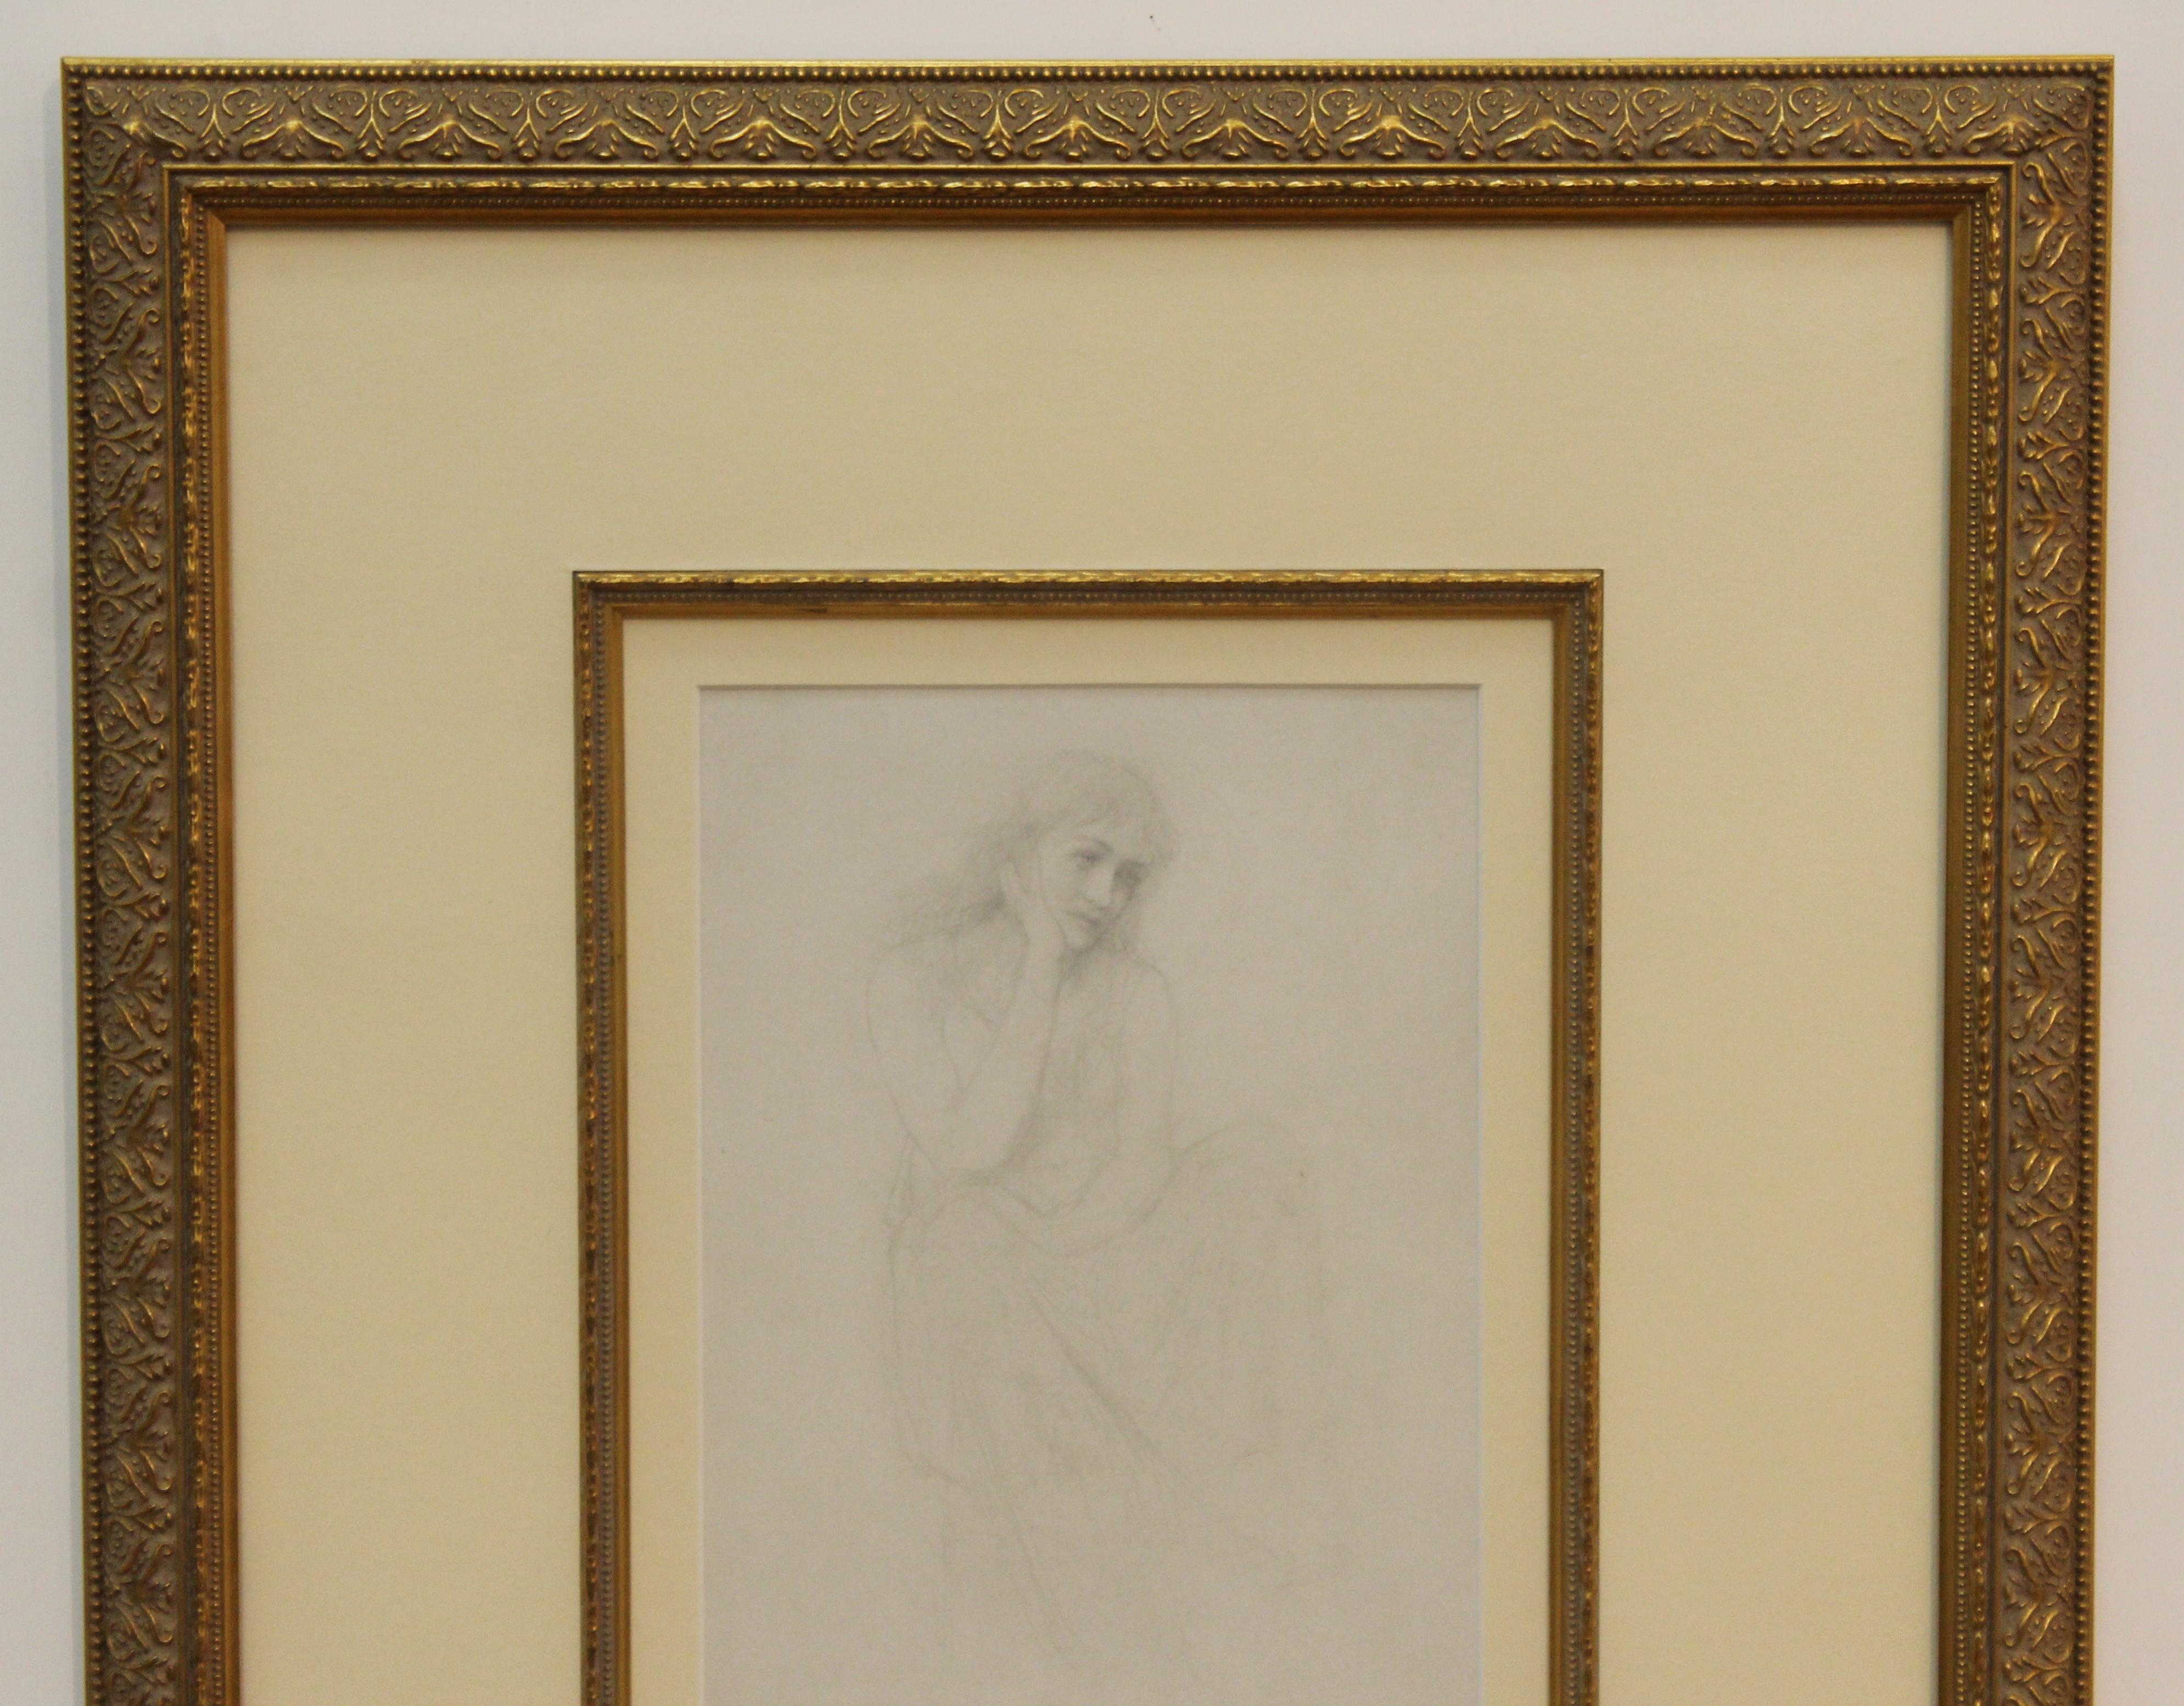 Academic manner pencil drawing on paper of a seated pensive woman. The drawing is left unsigned. The piece is framed in a partially gilt frame with ornamented border. In great vintage condition with age-appropriate wear and use.